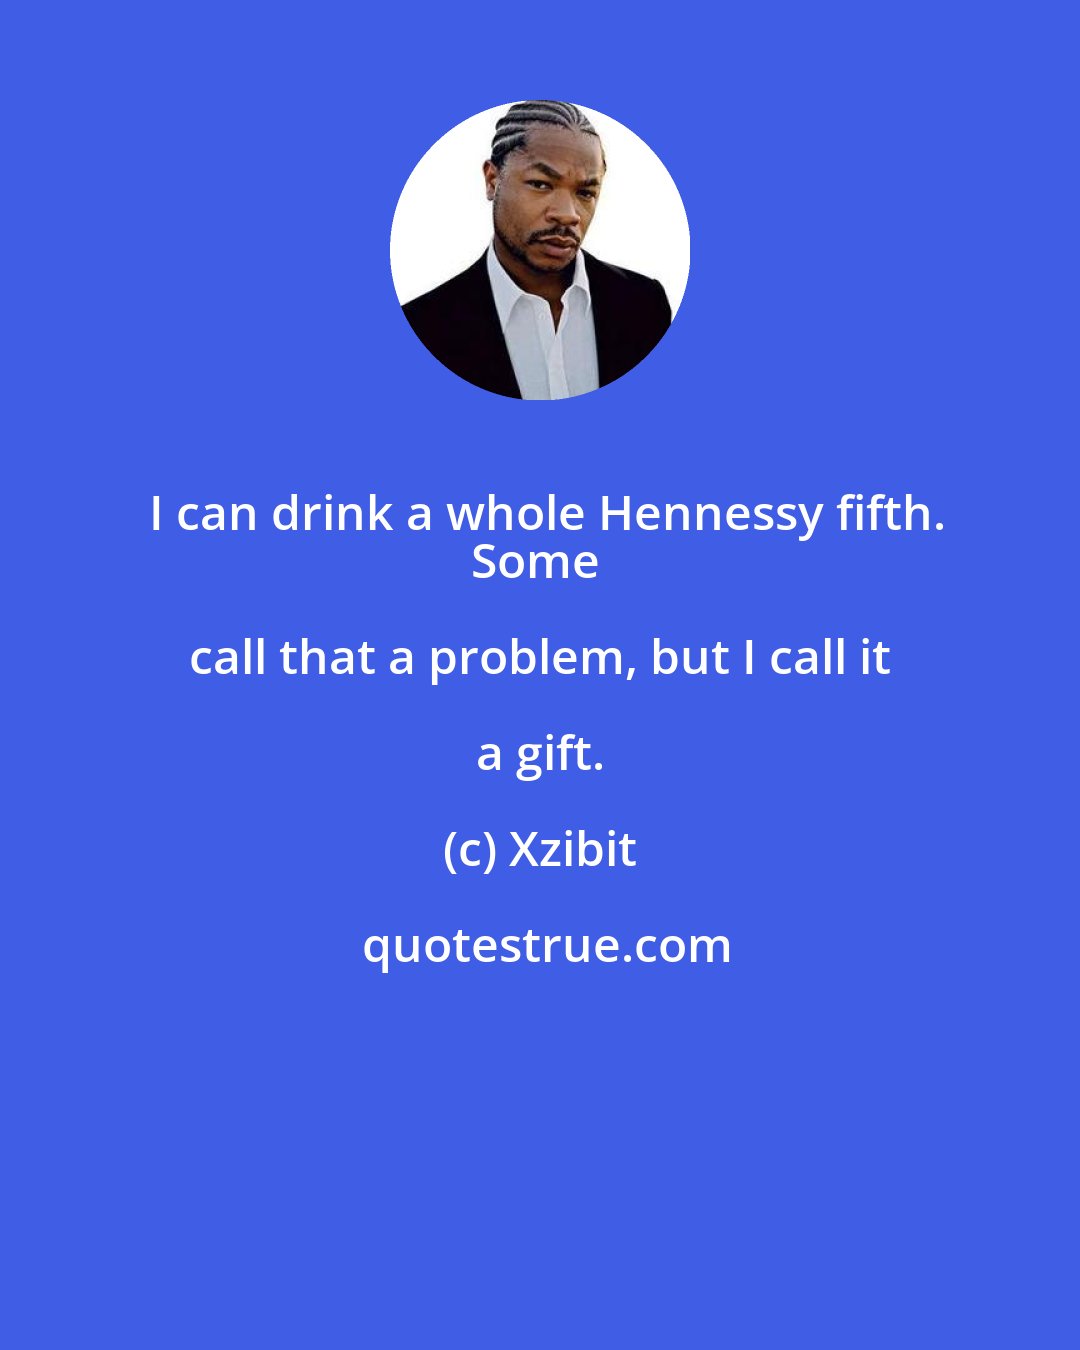 Xzibit: I can drink a whole Hennessy fifth.
Some call that a problem, but I call it a gift.